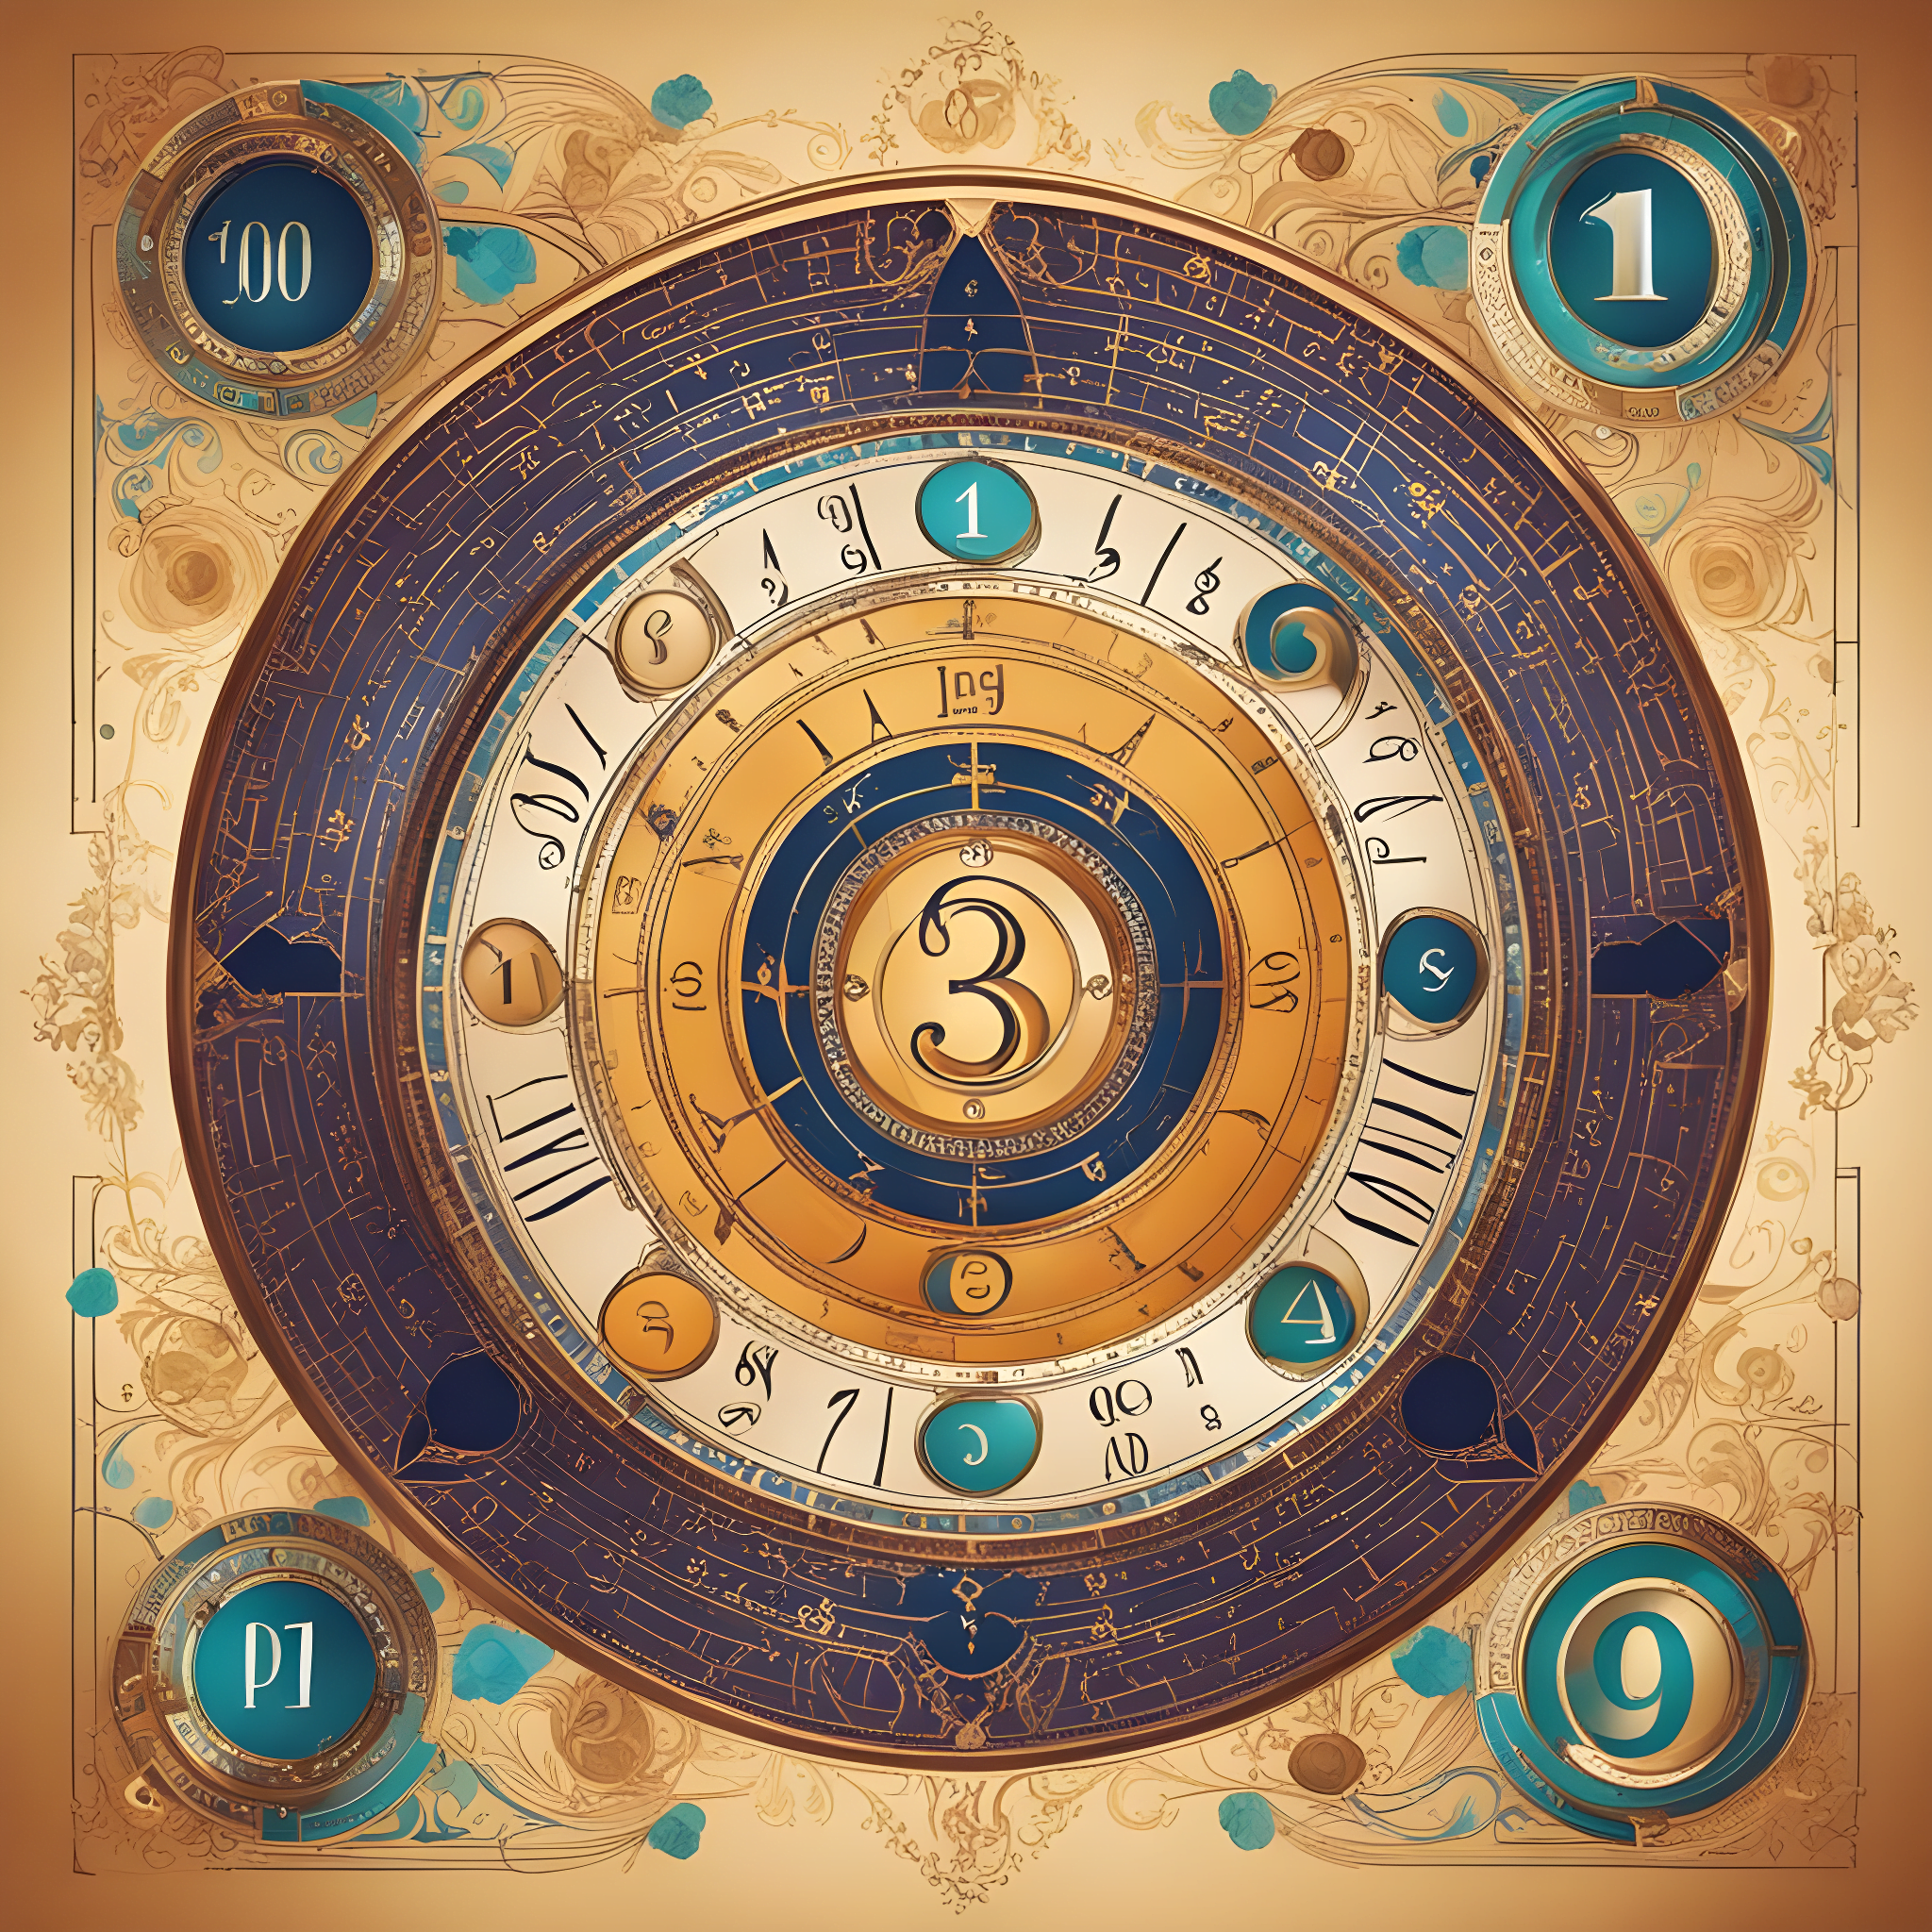 An image emphasizing the role of Numerology in personal development, featuring elements representing self-discovery, intuition enhancement, and overcoming challenges, with visuals that inspire growth.